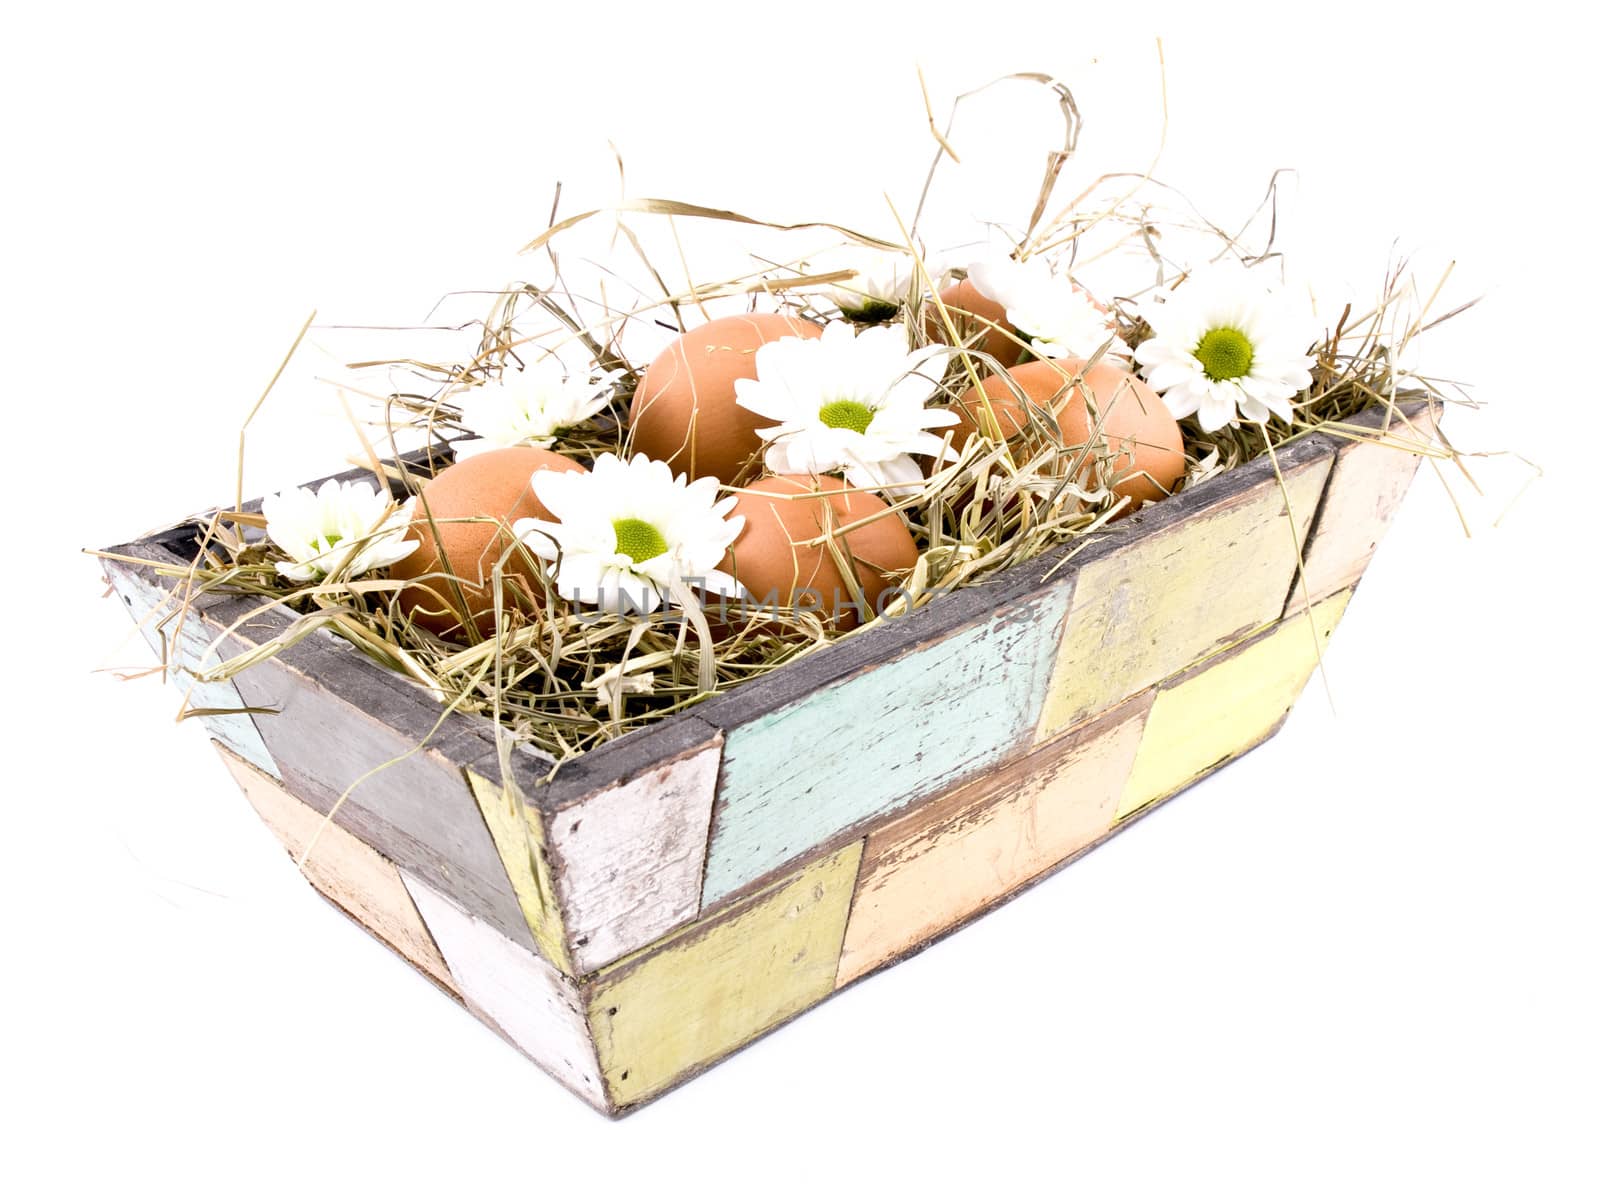 Fresh eggs and oxeye daisy flowers in old-fashioned flowerpot filled with hay on white background